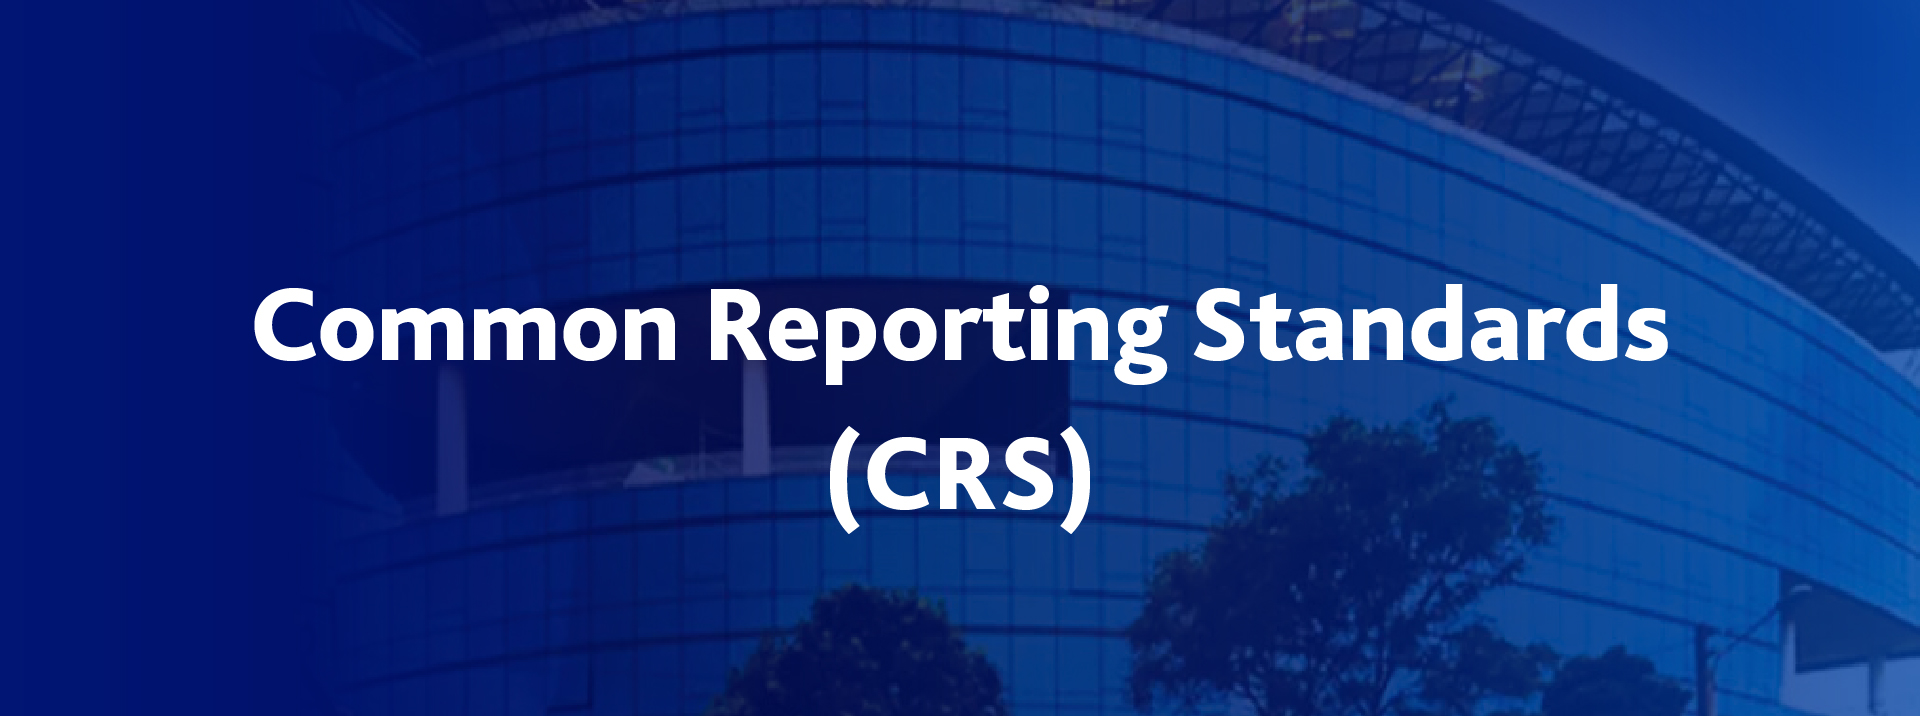 Understanding the Common Reporting Standards (CRS)